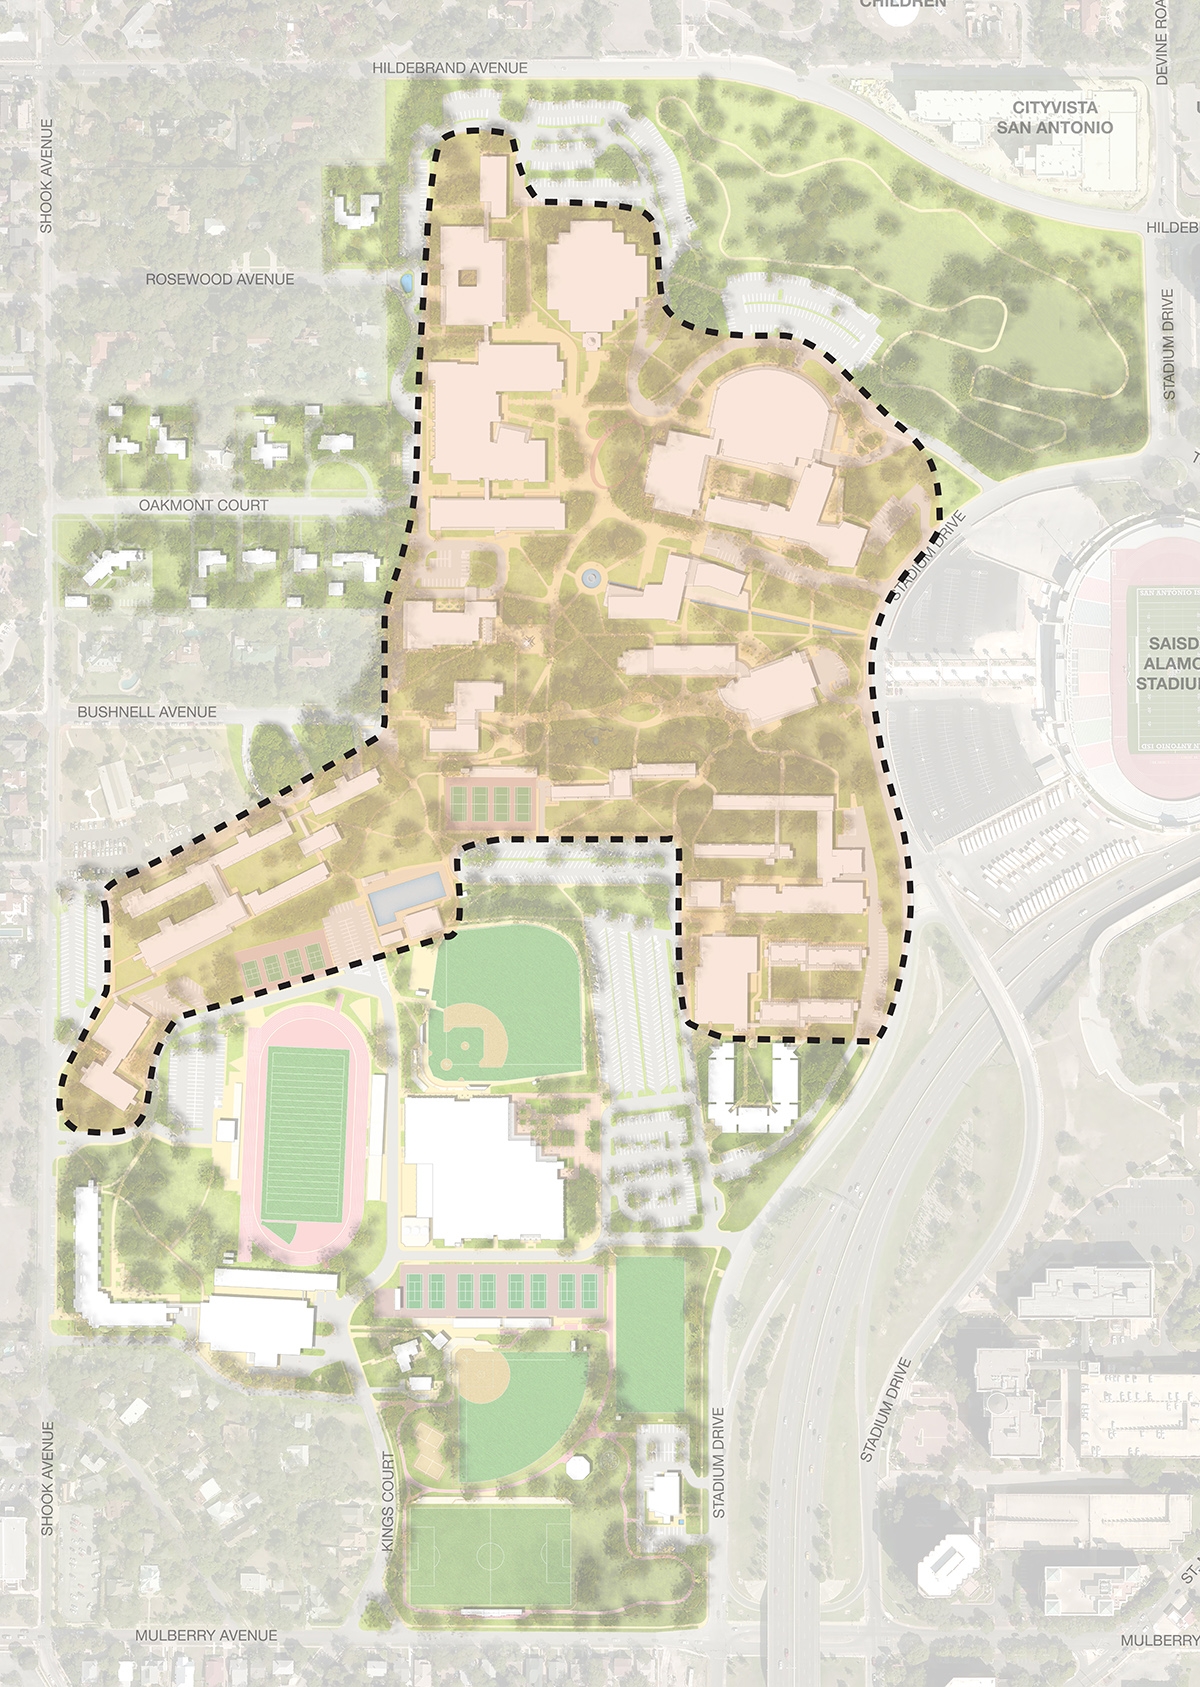 a map rendering shows the boundaries of Trinity's national historic district on campus